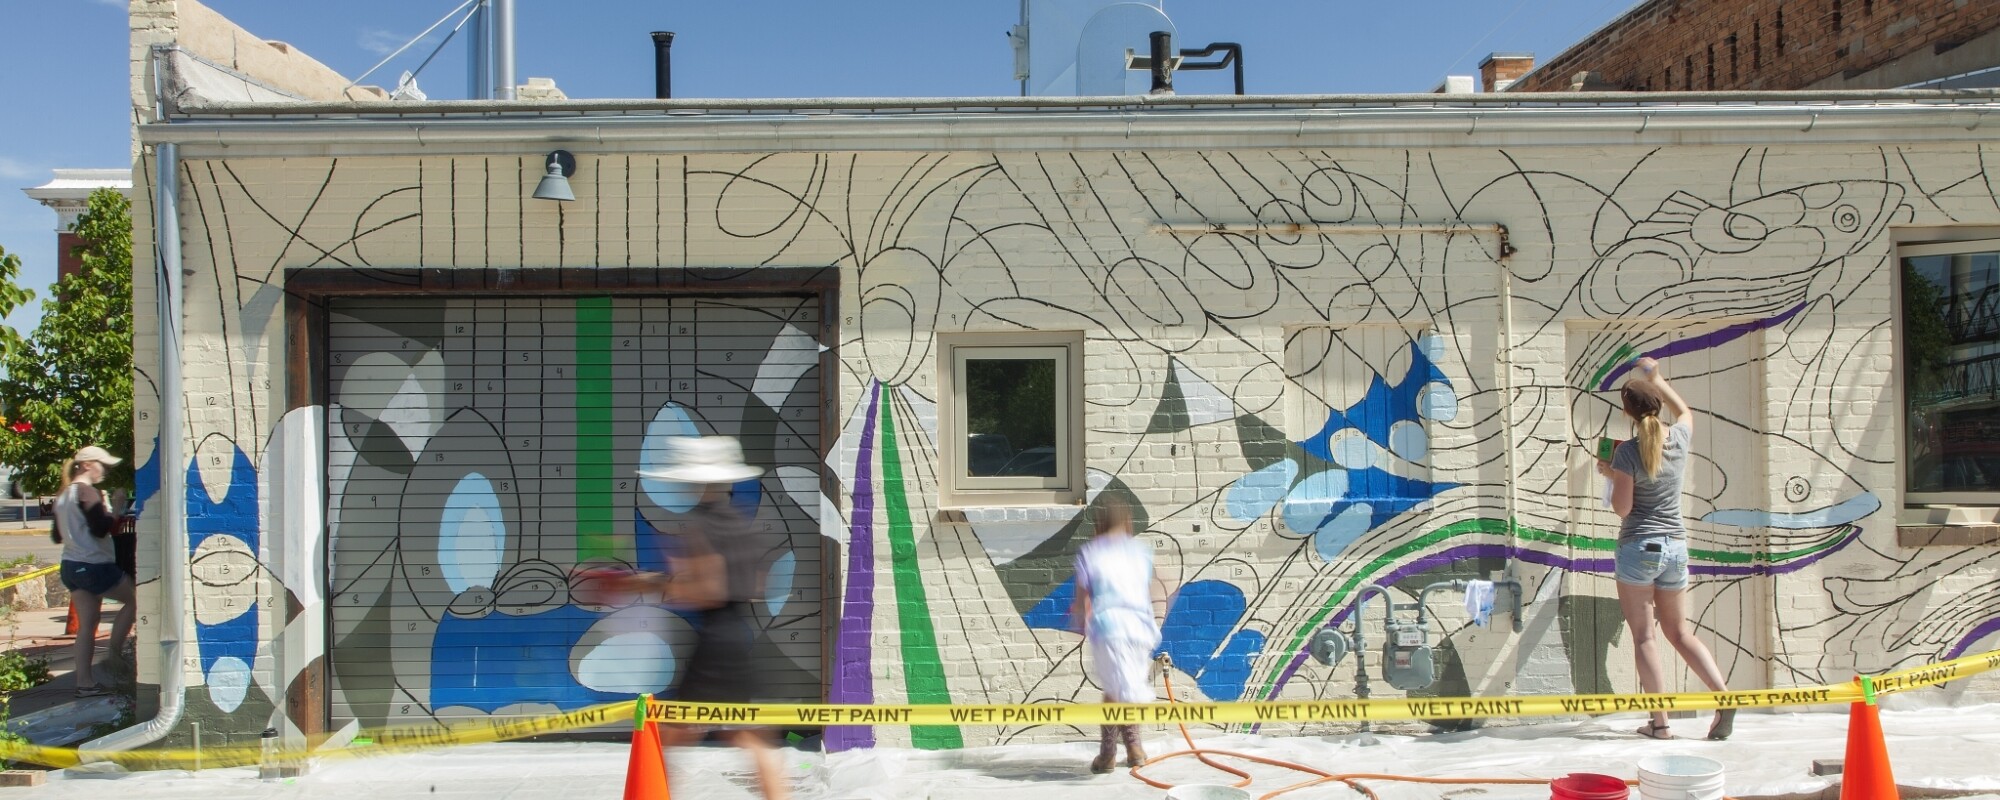 People helping paint a mural with different shades of blue on the side of a downtown building.